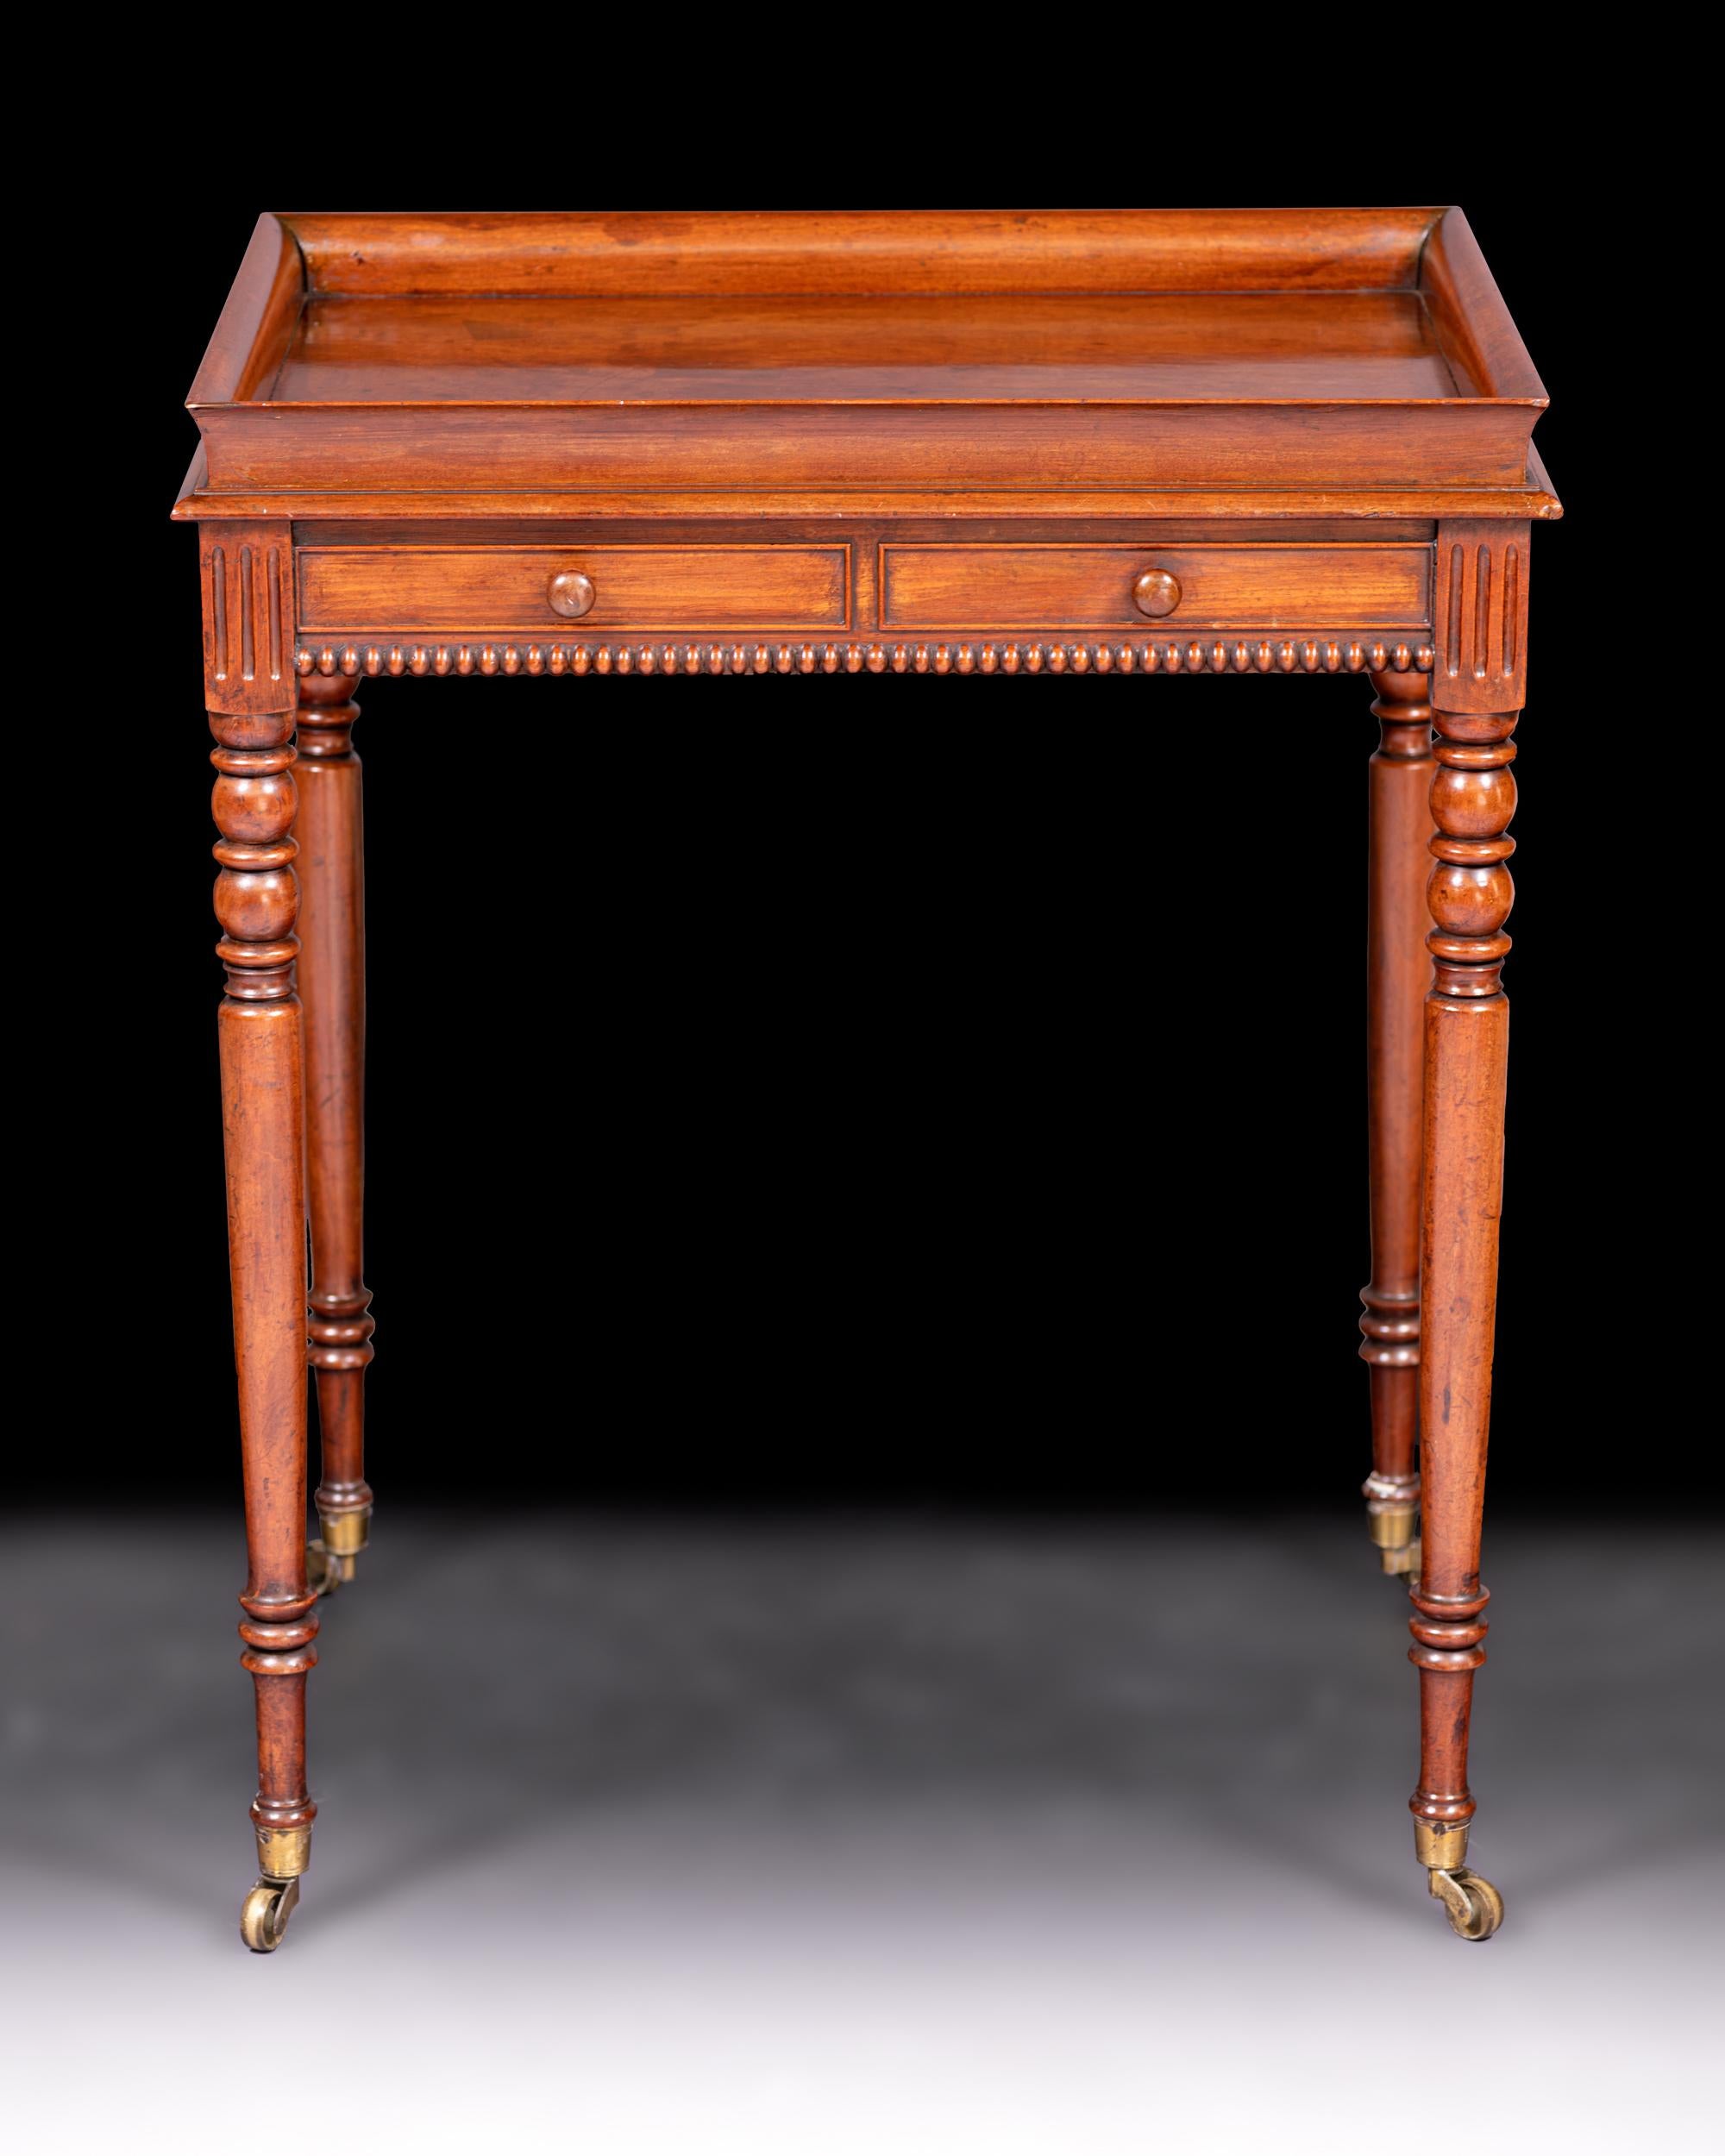 Wood Early 19th Century English Regency Side Table Attributed to Gillows of Lancaster For Sale